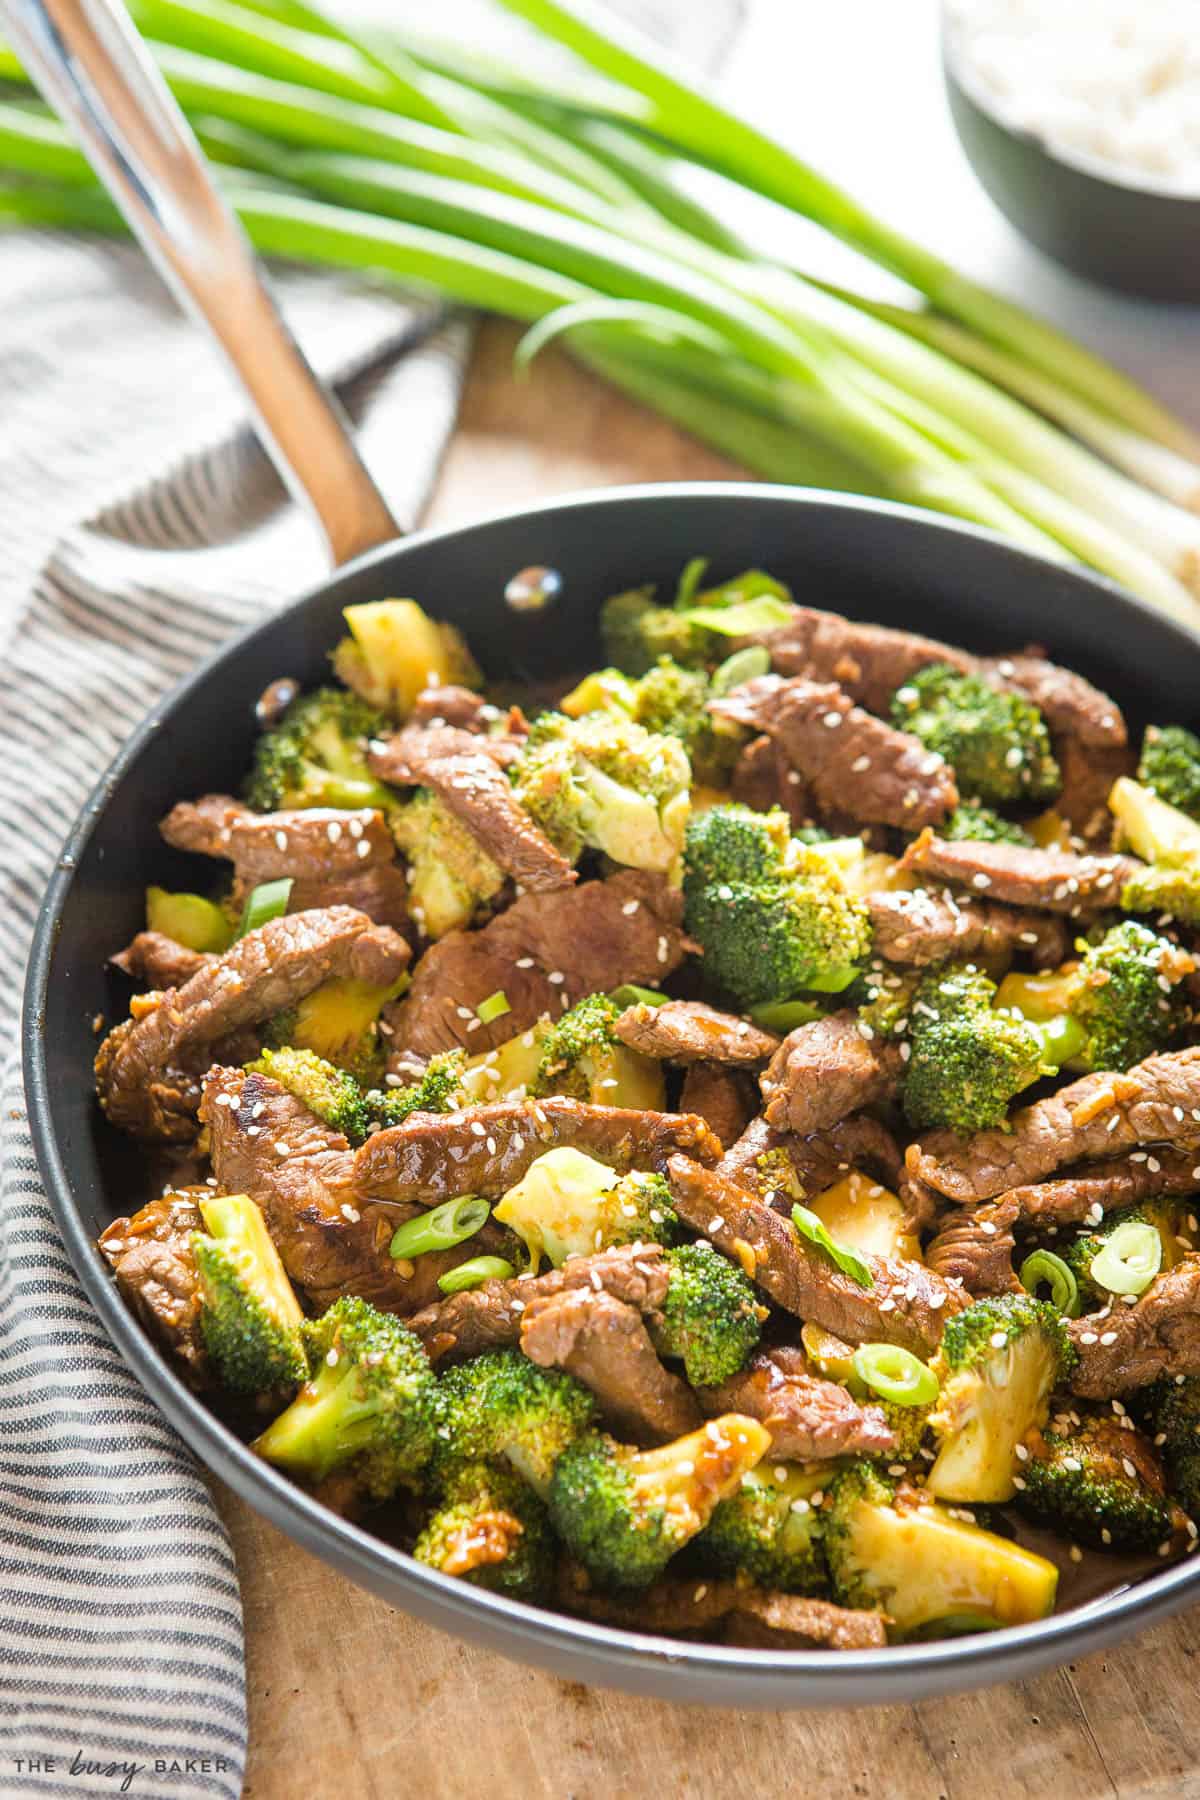 beef and broccoli stir fry in black frying pan